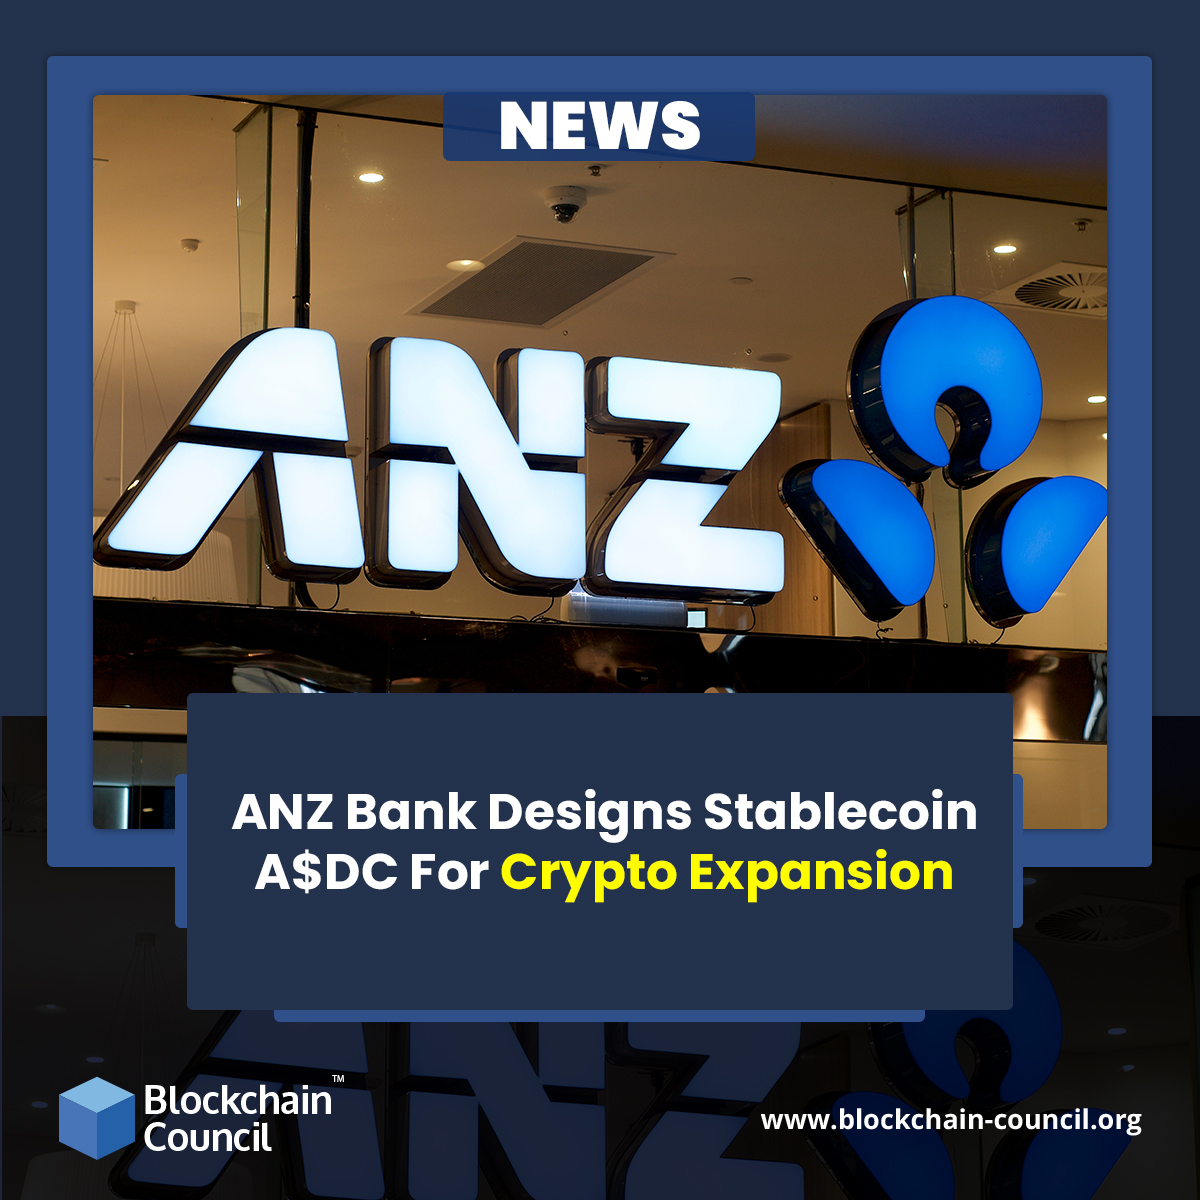 ANZ Bank Designs Stablecoin A$DC For Crypto Expansion